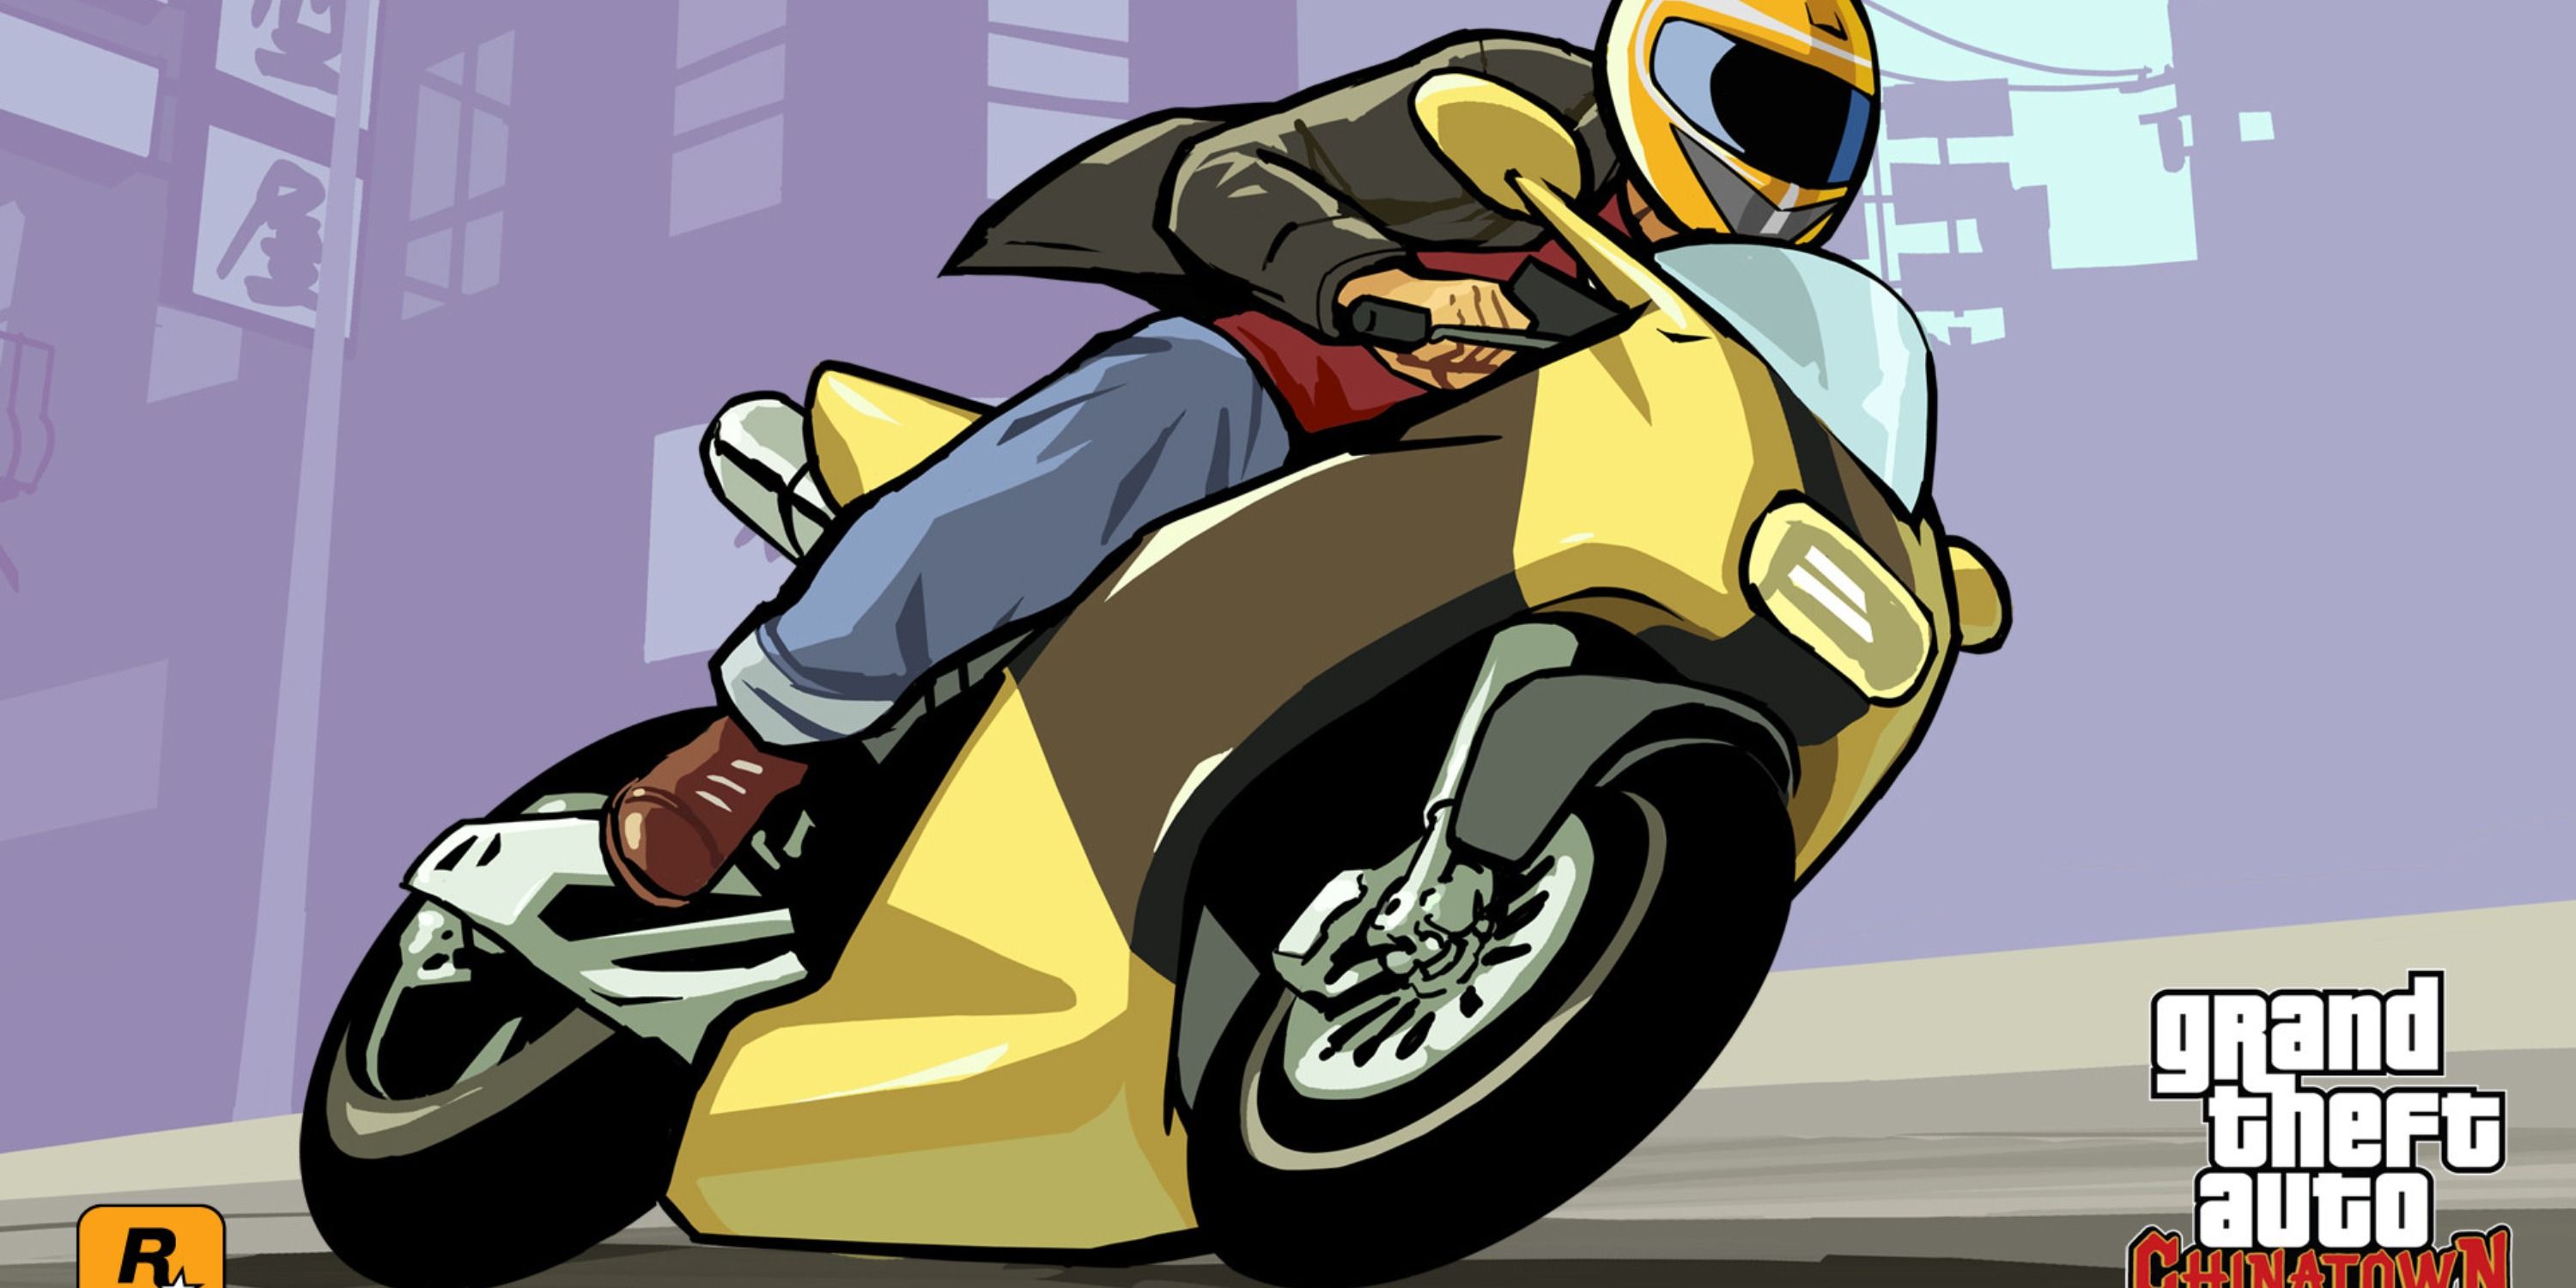 An artwork image of Grand Theft Auto Chinatown Wars. It features a person riding a gold motorbike